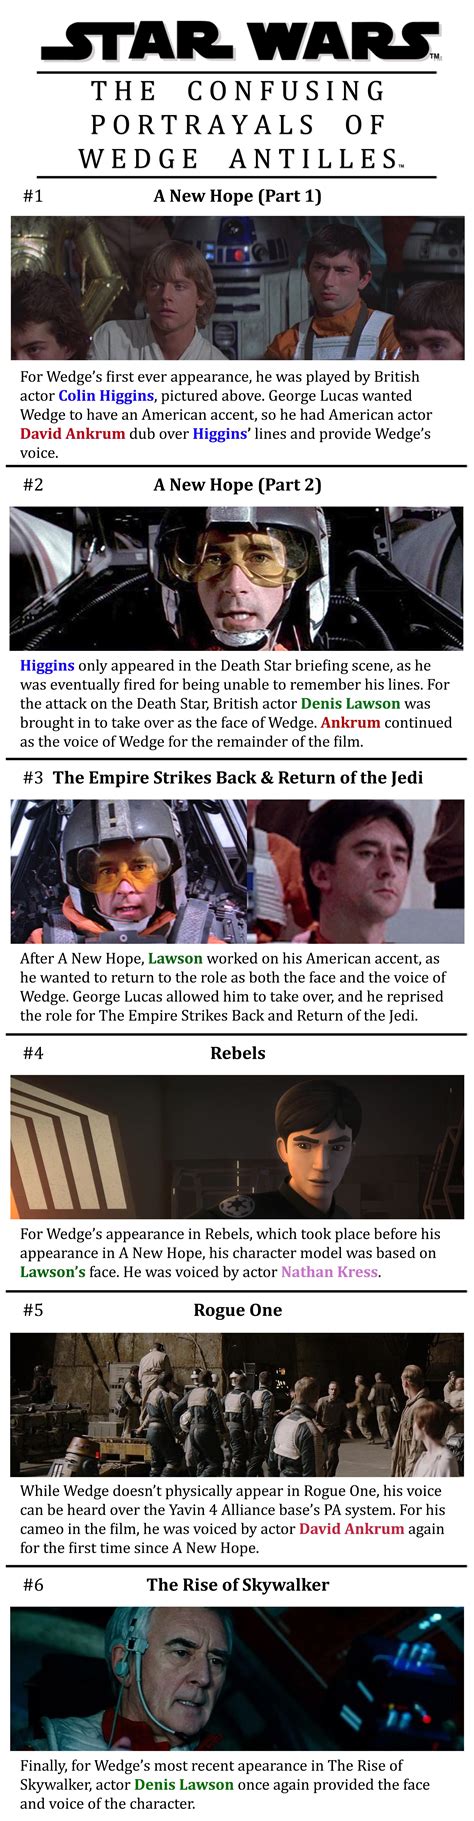 Star Wars The Confusing Portrayals Of Wedge Antilles Starwars